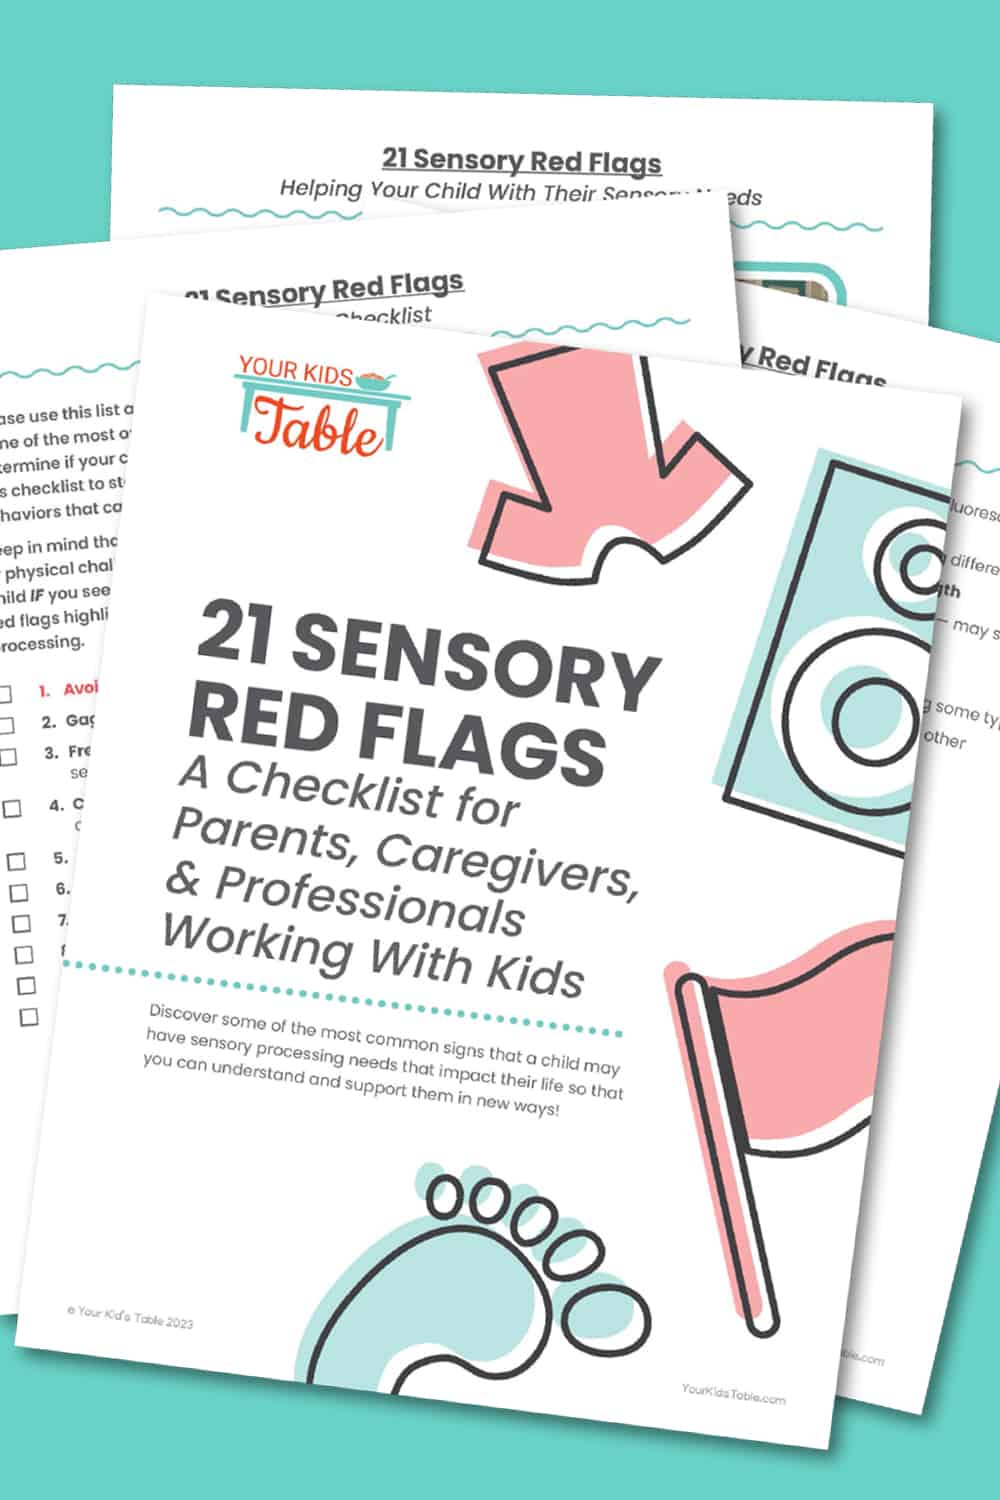 Commonly overlooked sensory red flags and signs of sensory issues that could be a clue to your child’s needs, which will decrease confusion and frustration.